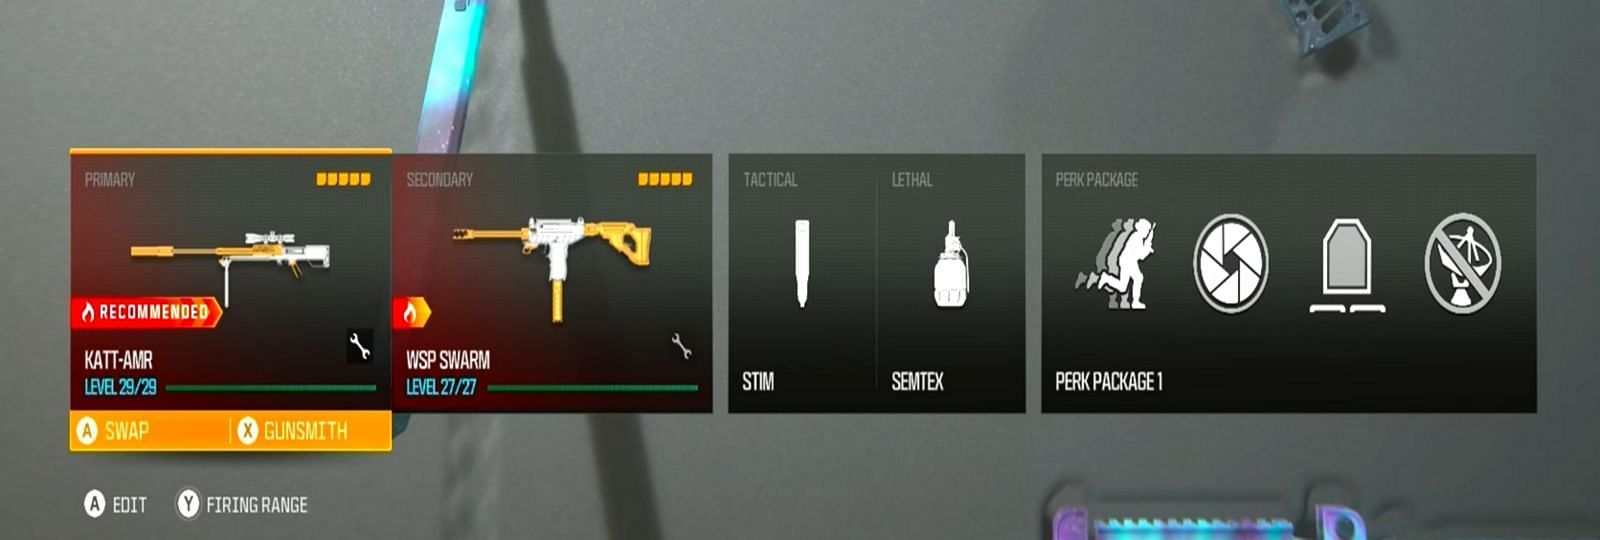 Best Class Setup for KATT AMR in Warzone (Image via Activision)